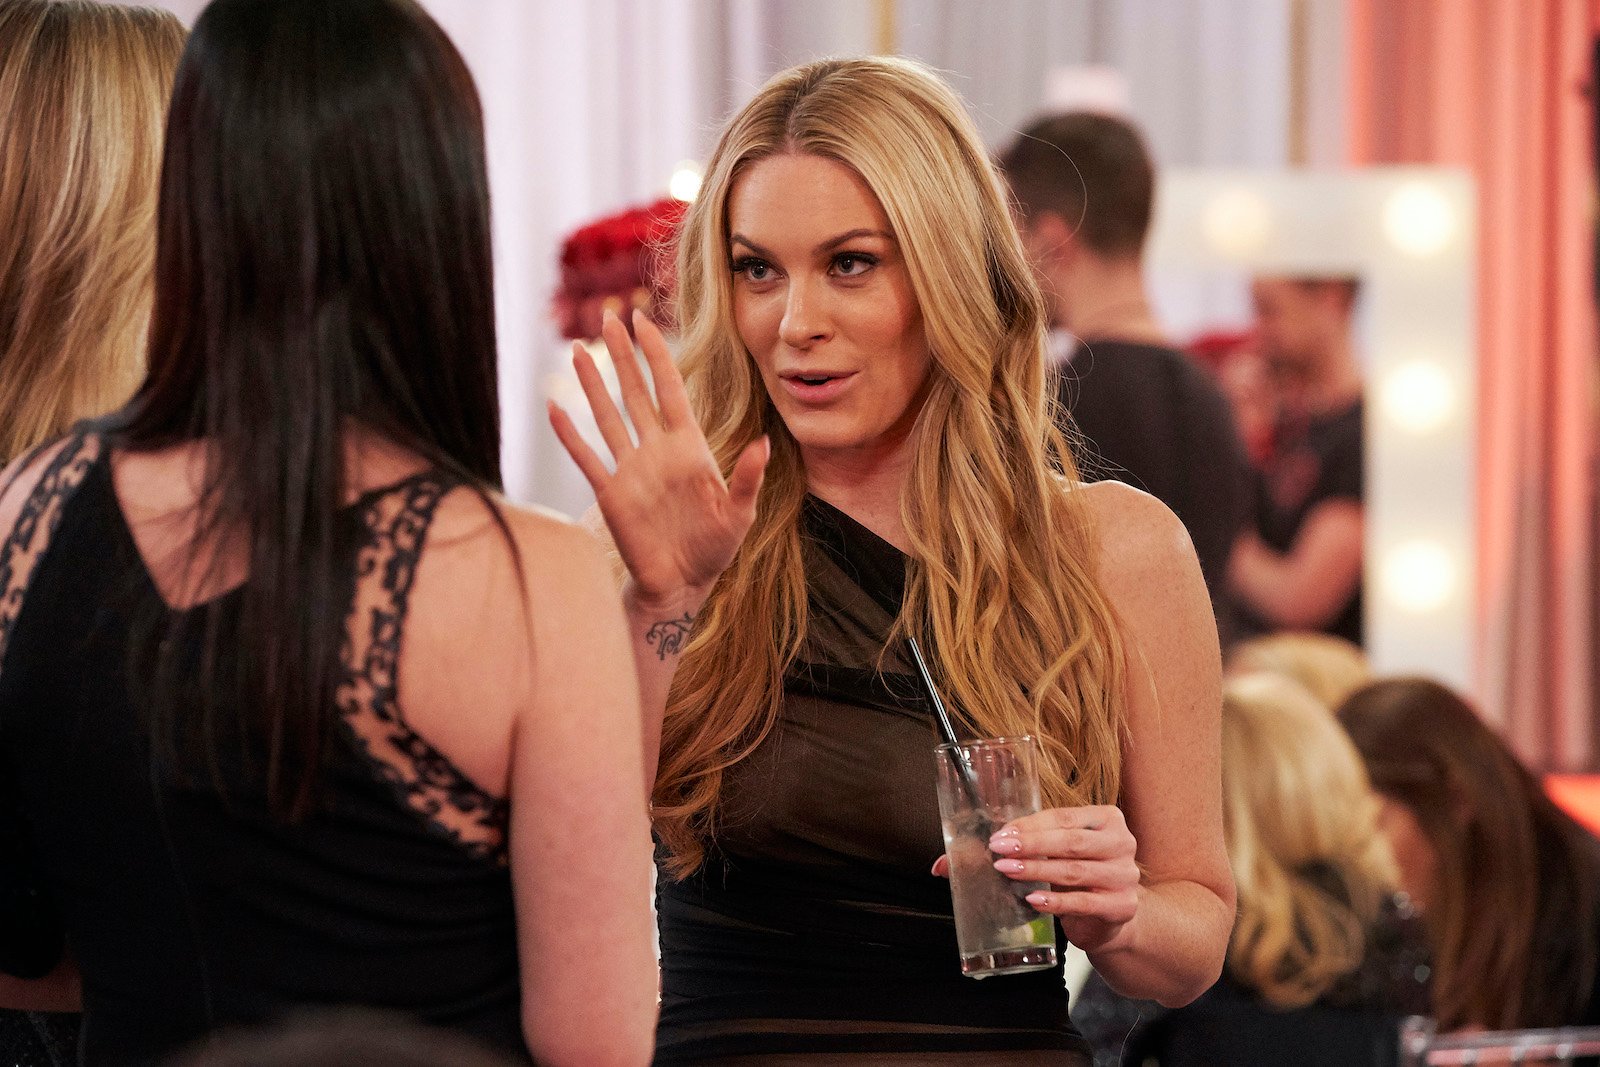 Leah McSweeney from 'RHONY' holds up her hand when talking to someone at a party